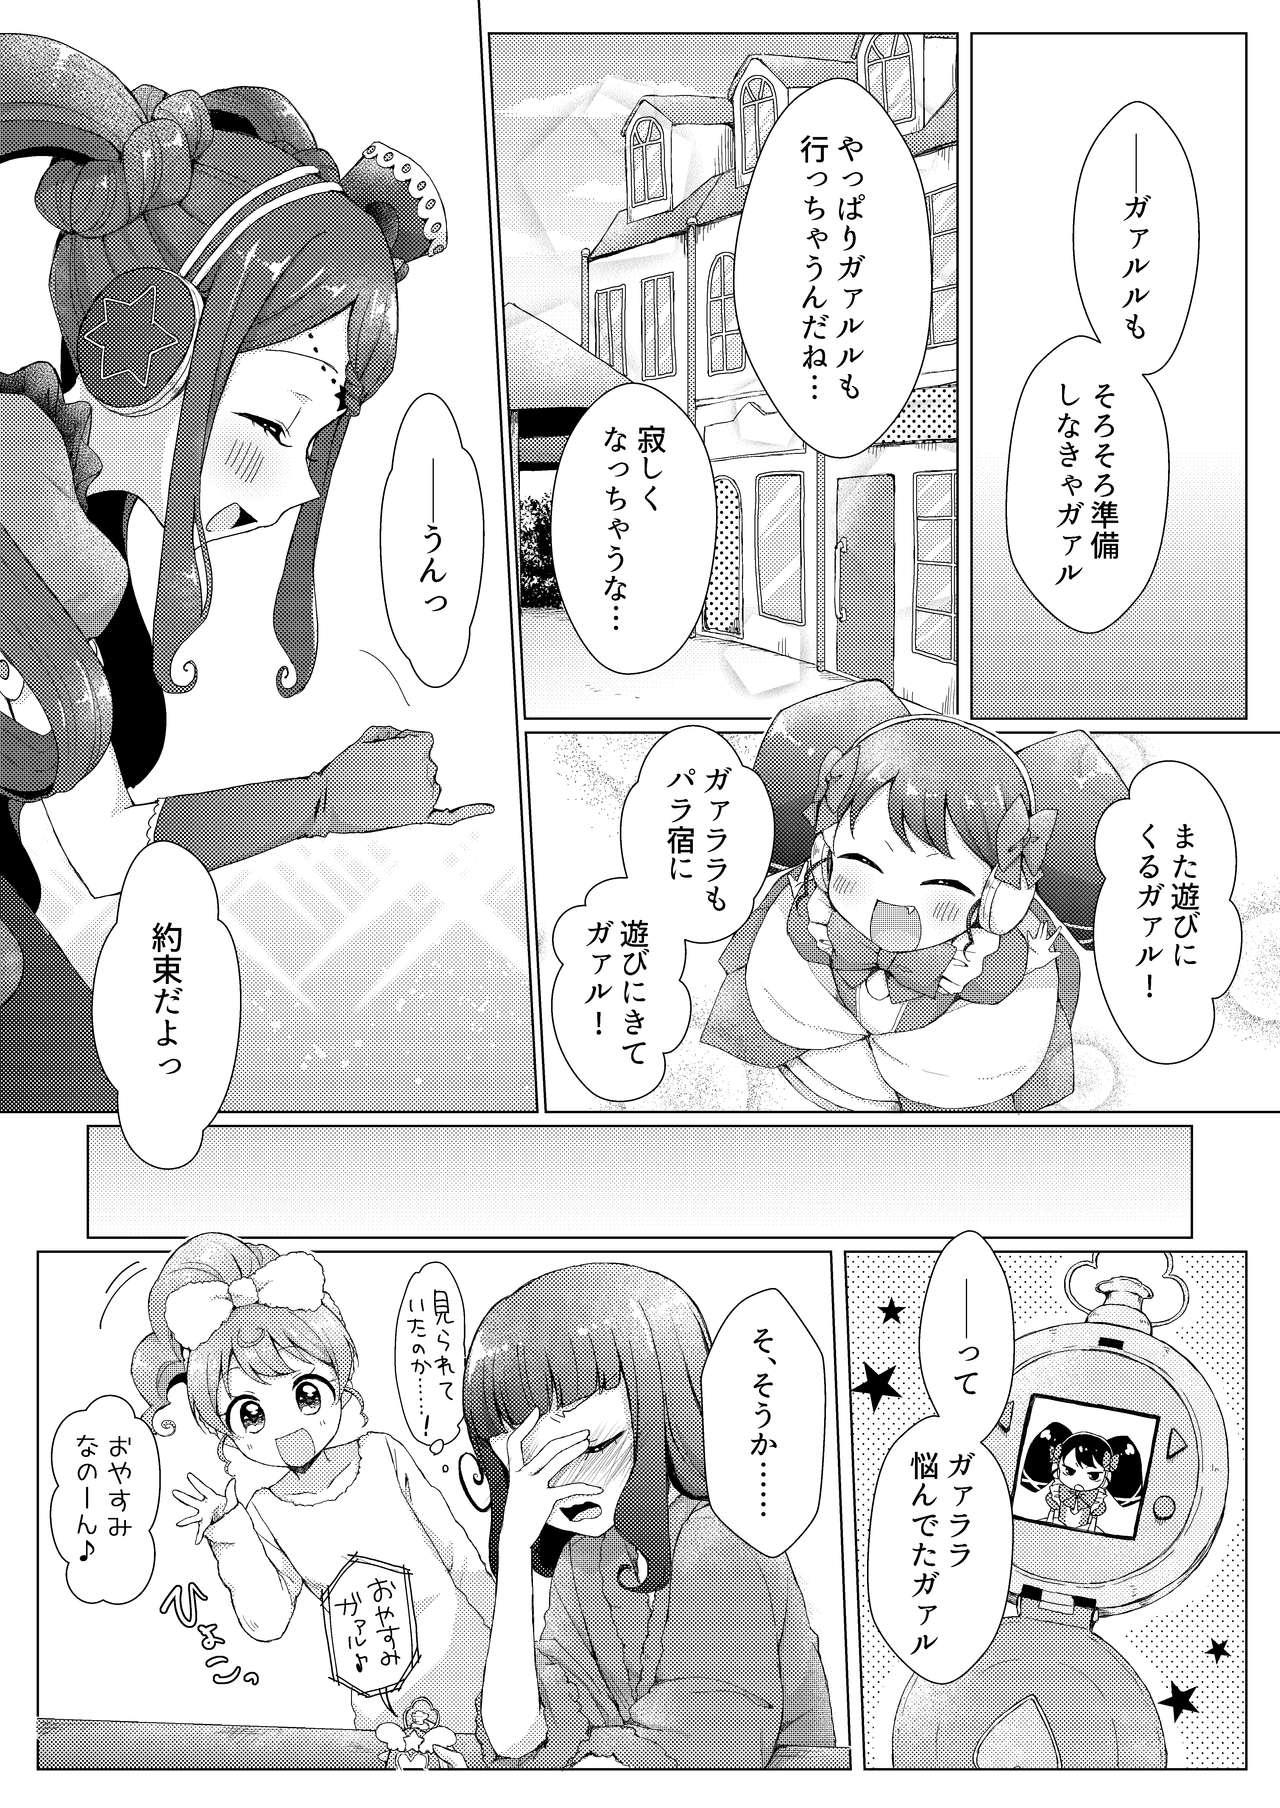 Rough Porn MELLOW MELLOW TONIGHT - Pripara Missionary Position Porn - Page 5